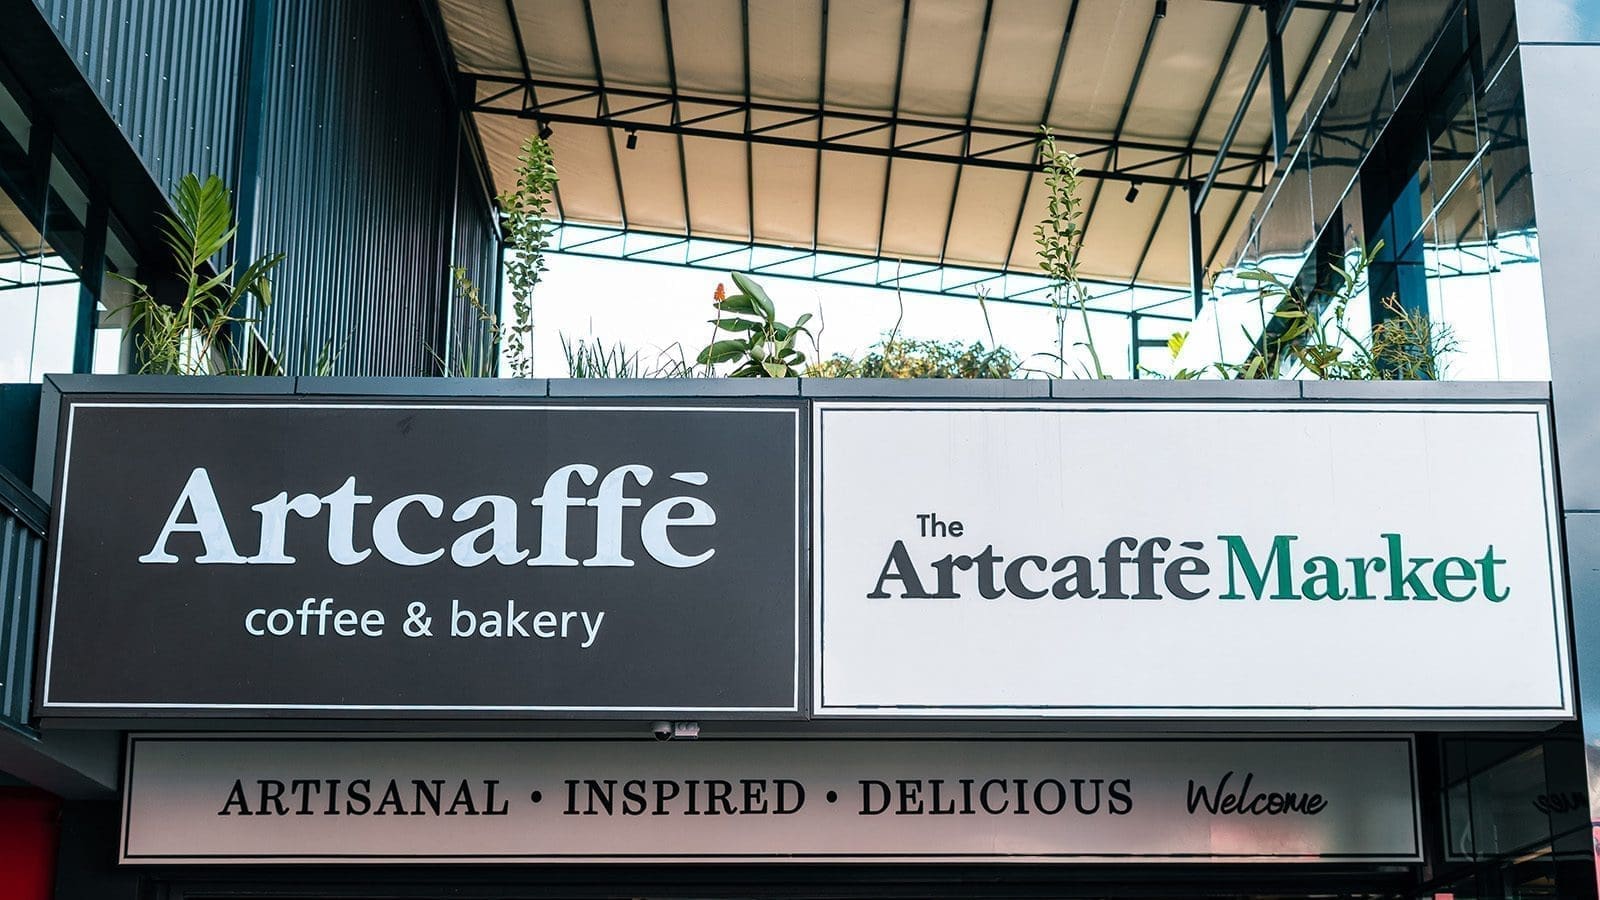 Artcaffé Group expands food market concept with opening of new outlet